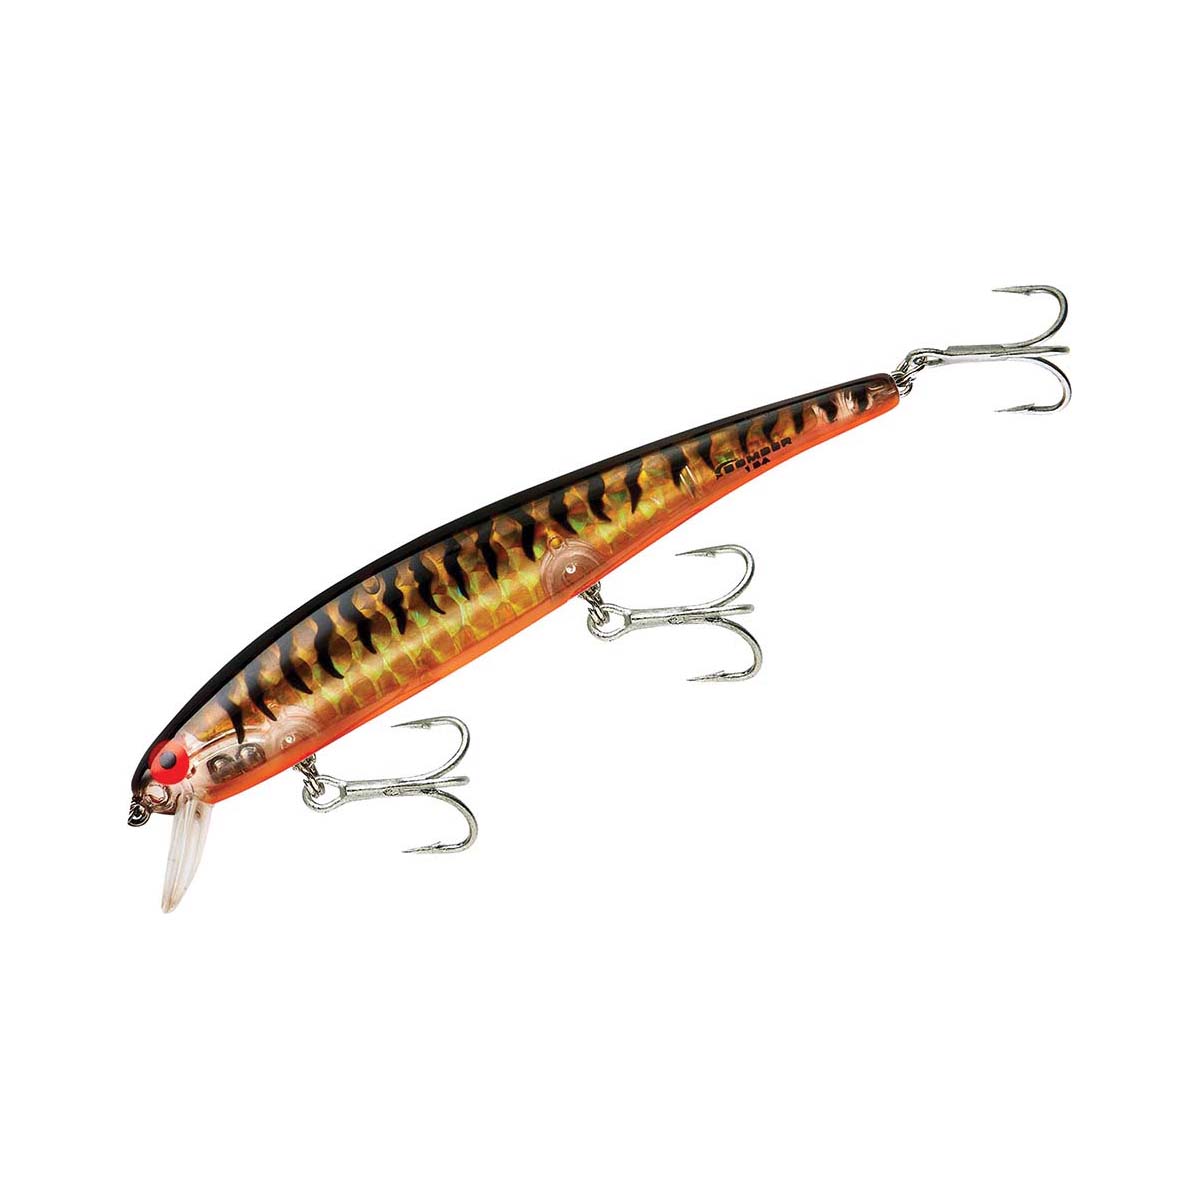 Bomber 15A Heavy Duty Hard Body Lure 11.9cm Tiger Lily